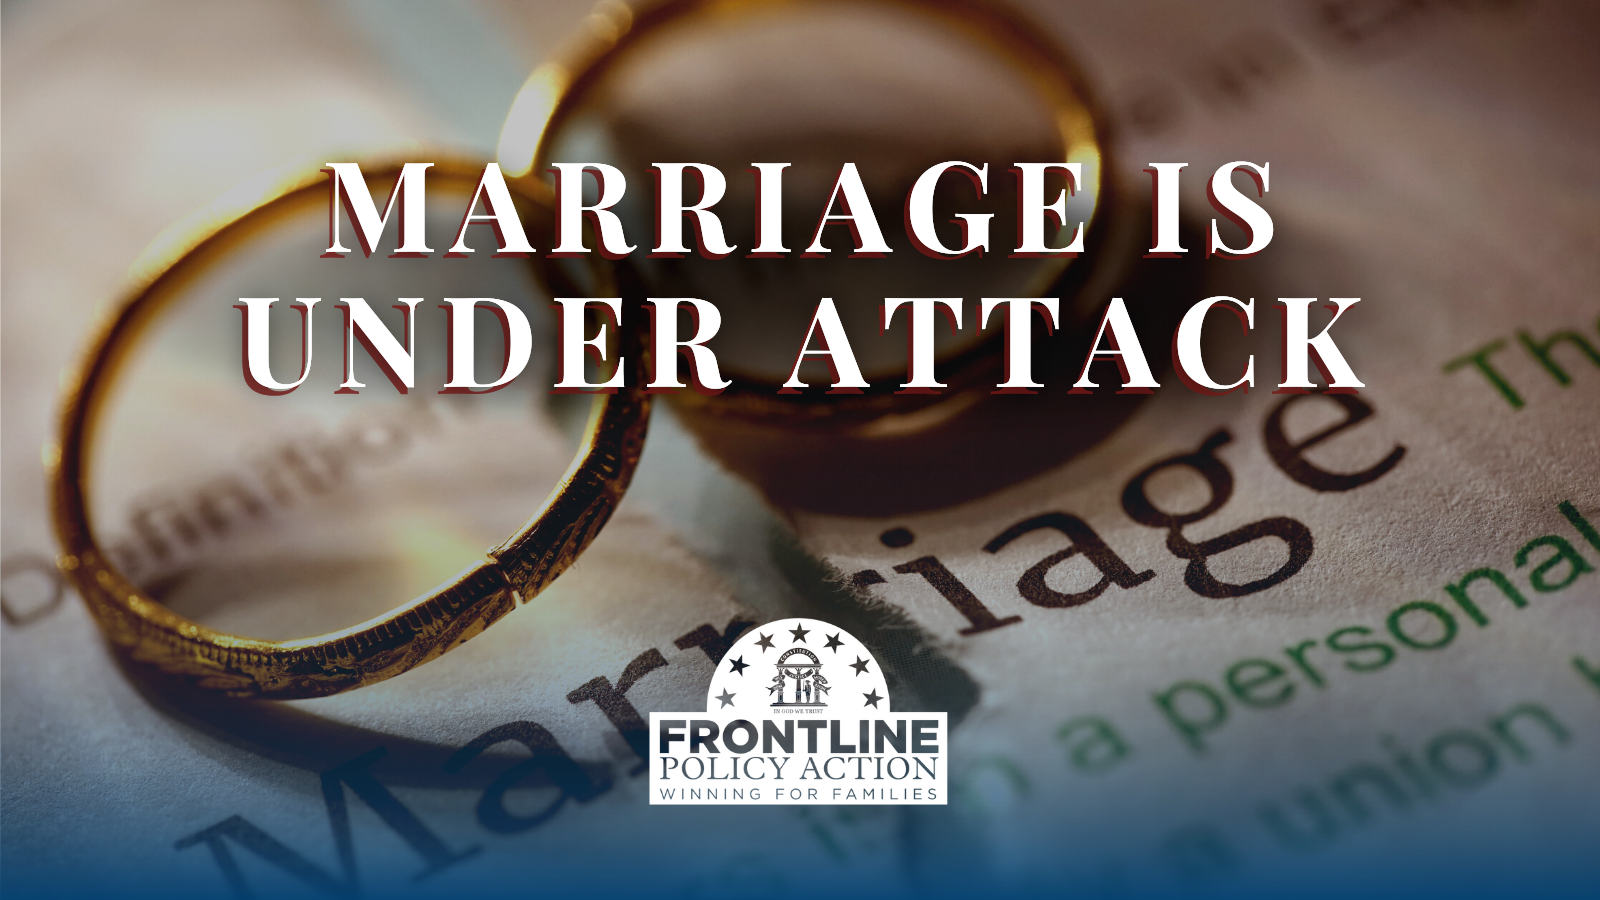 URGENT: Bill attacking Marriage up for a Vote – Take Action!